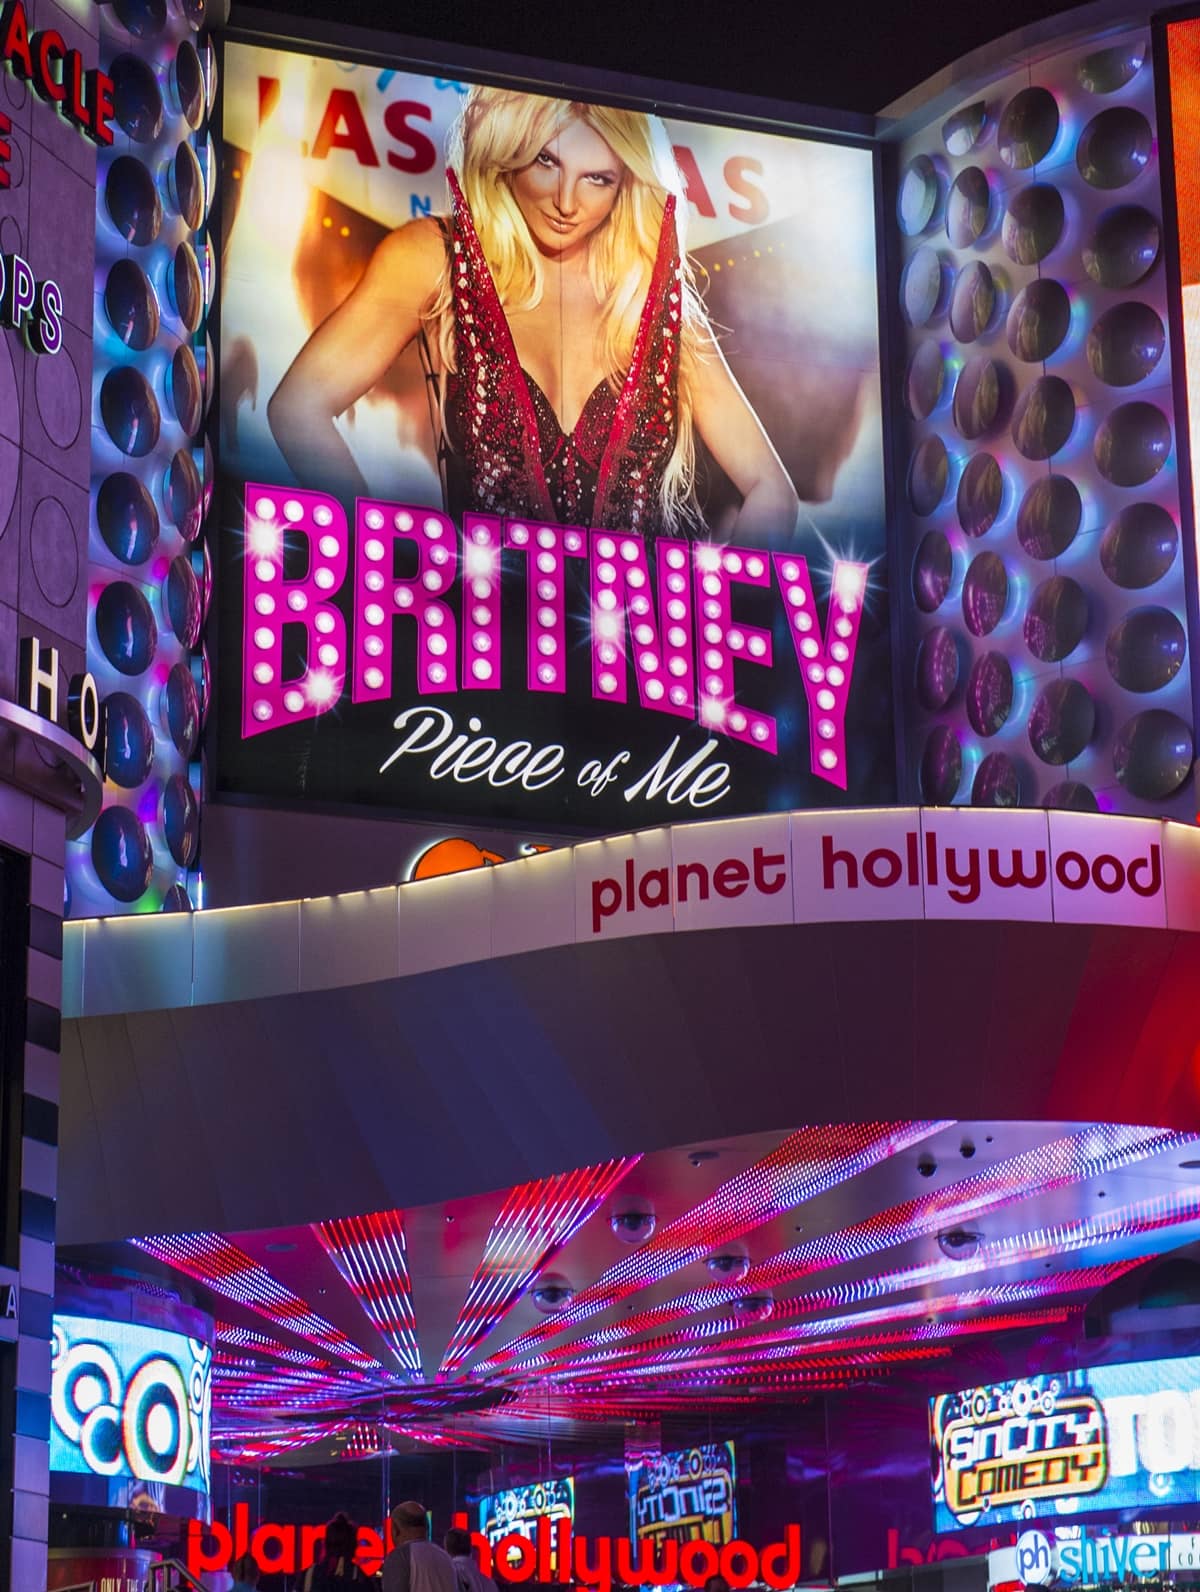 One of the best-paid entertainers in the world, Britney Spears has been making up to $500,000 per show in Las Vegas